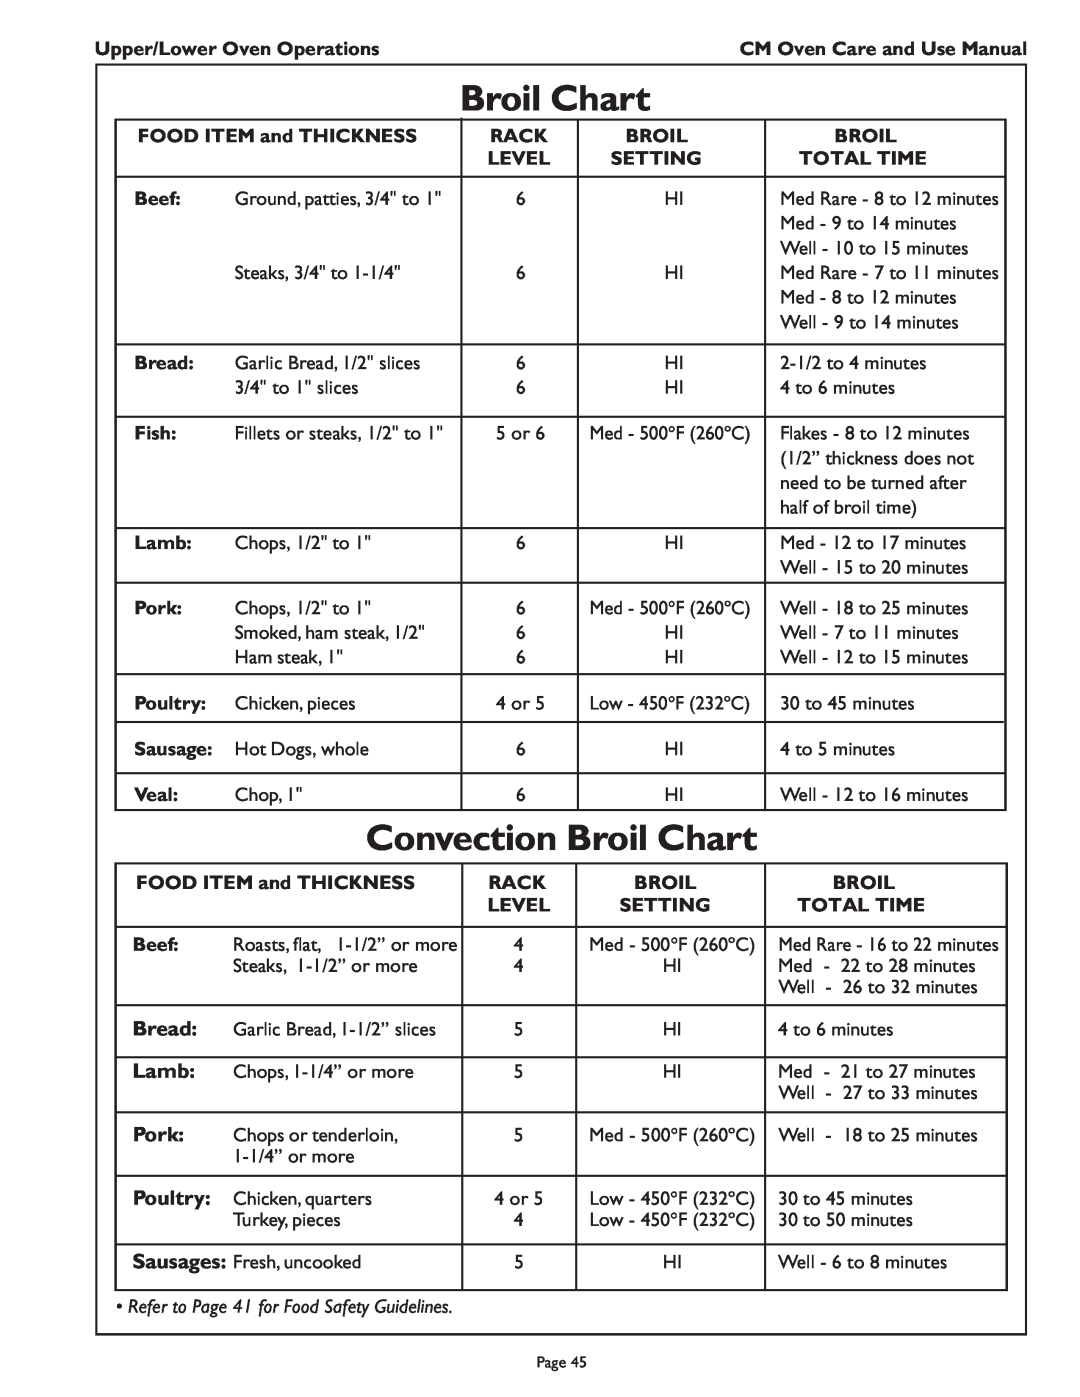 Thermador CM302 manual Convection Broil Chart, Bread, Lamb, Pork, Poultry, Refer to Page 41 for Food Safety Guidelines 